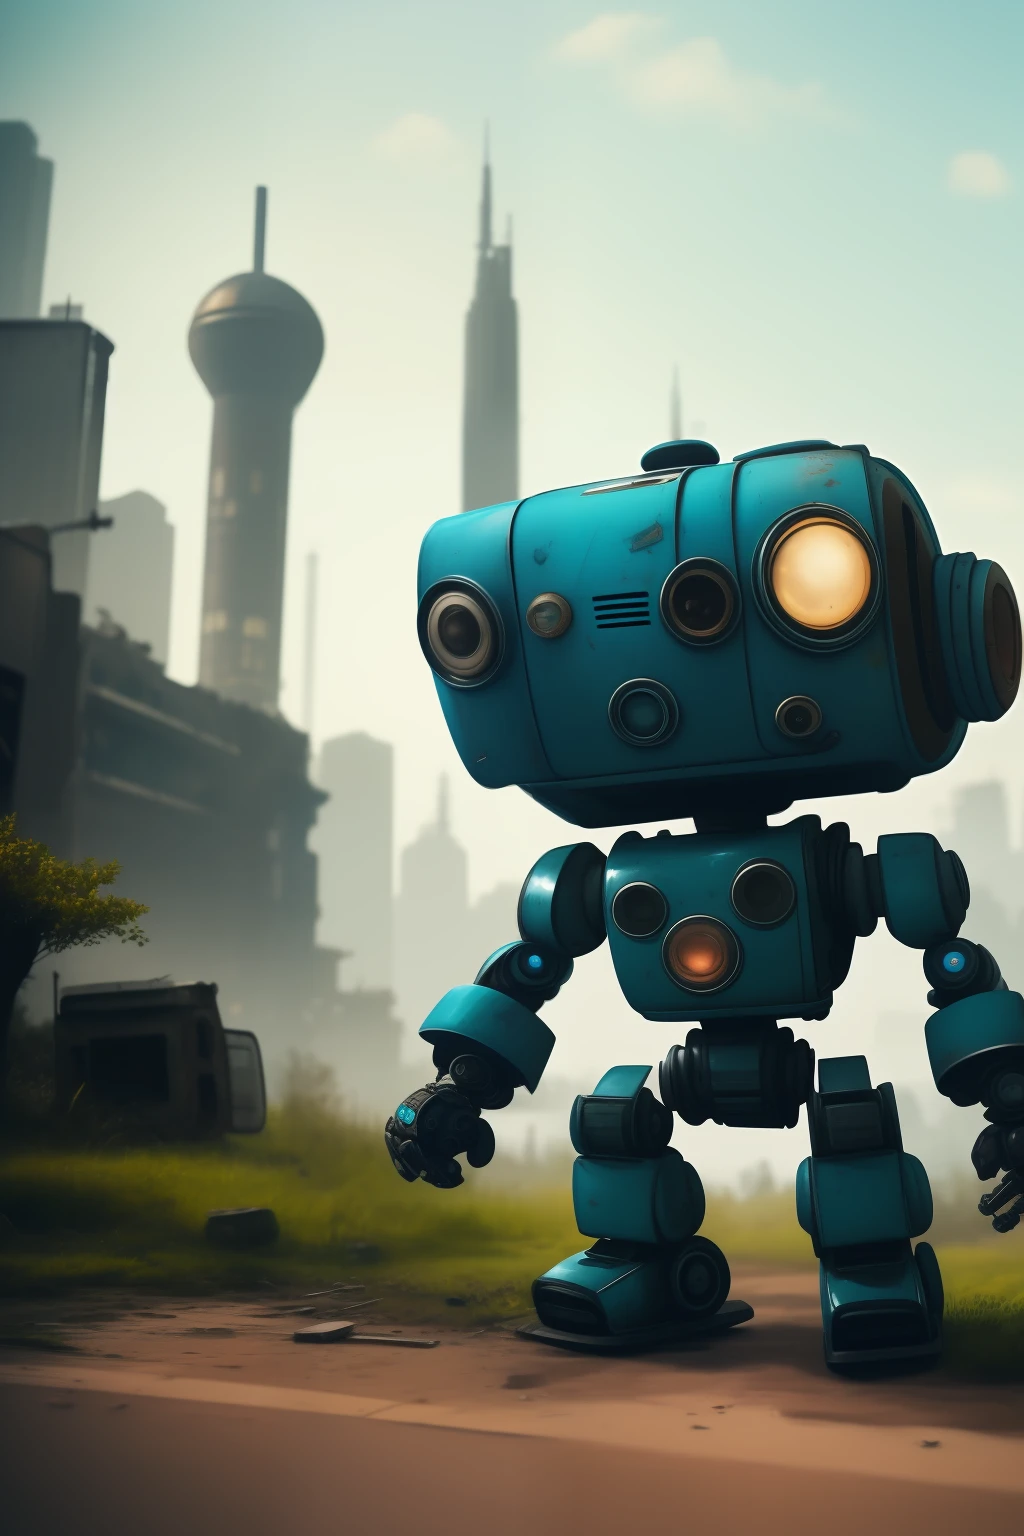 beautifully detailed background, detailed background, small robot in overgrown city, rollerblade on feet, action pose, blue robot, cute, professional artwork, fallout, post apocalyptic, ruined buildings, wreckage, rust, cute robot, fun mood, retro style robot, old fridge, led screen face, 2 eyes, pixel face, robot's face is a television screen, running pose